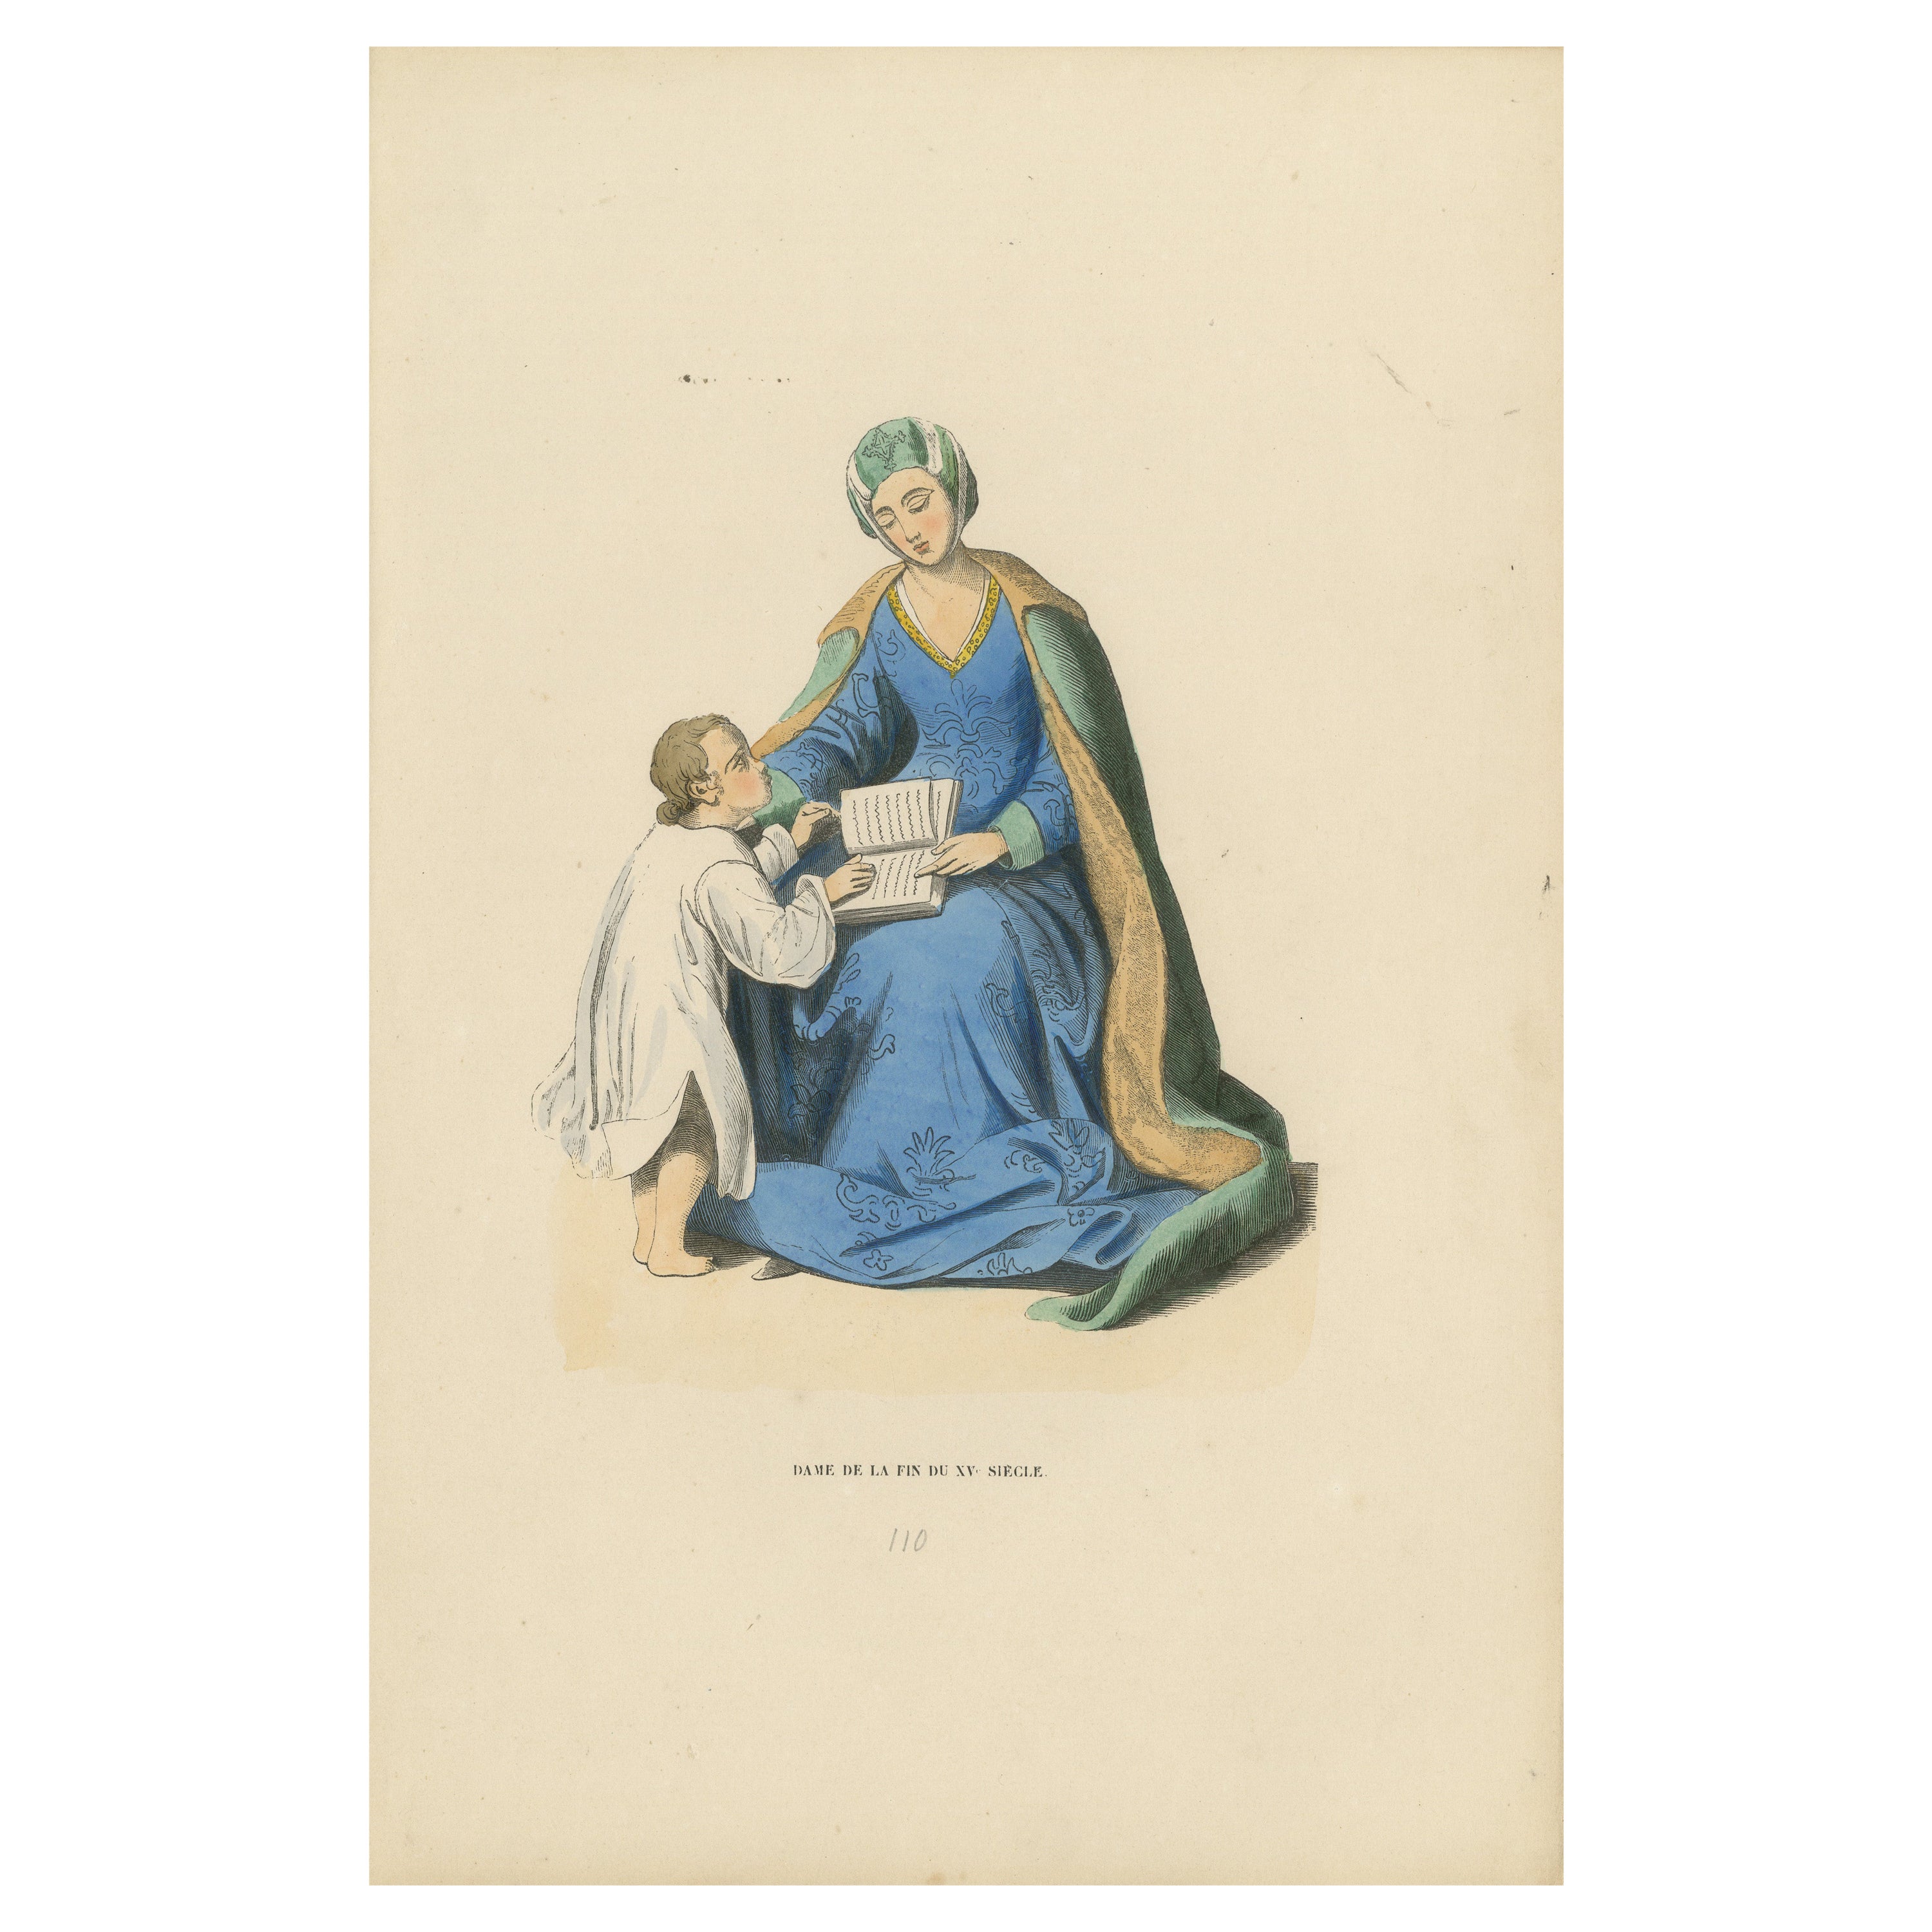 Maternal Instruction in the 15th Century: A Noblewoman Teaching a Child, 1847 For Sale